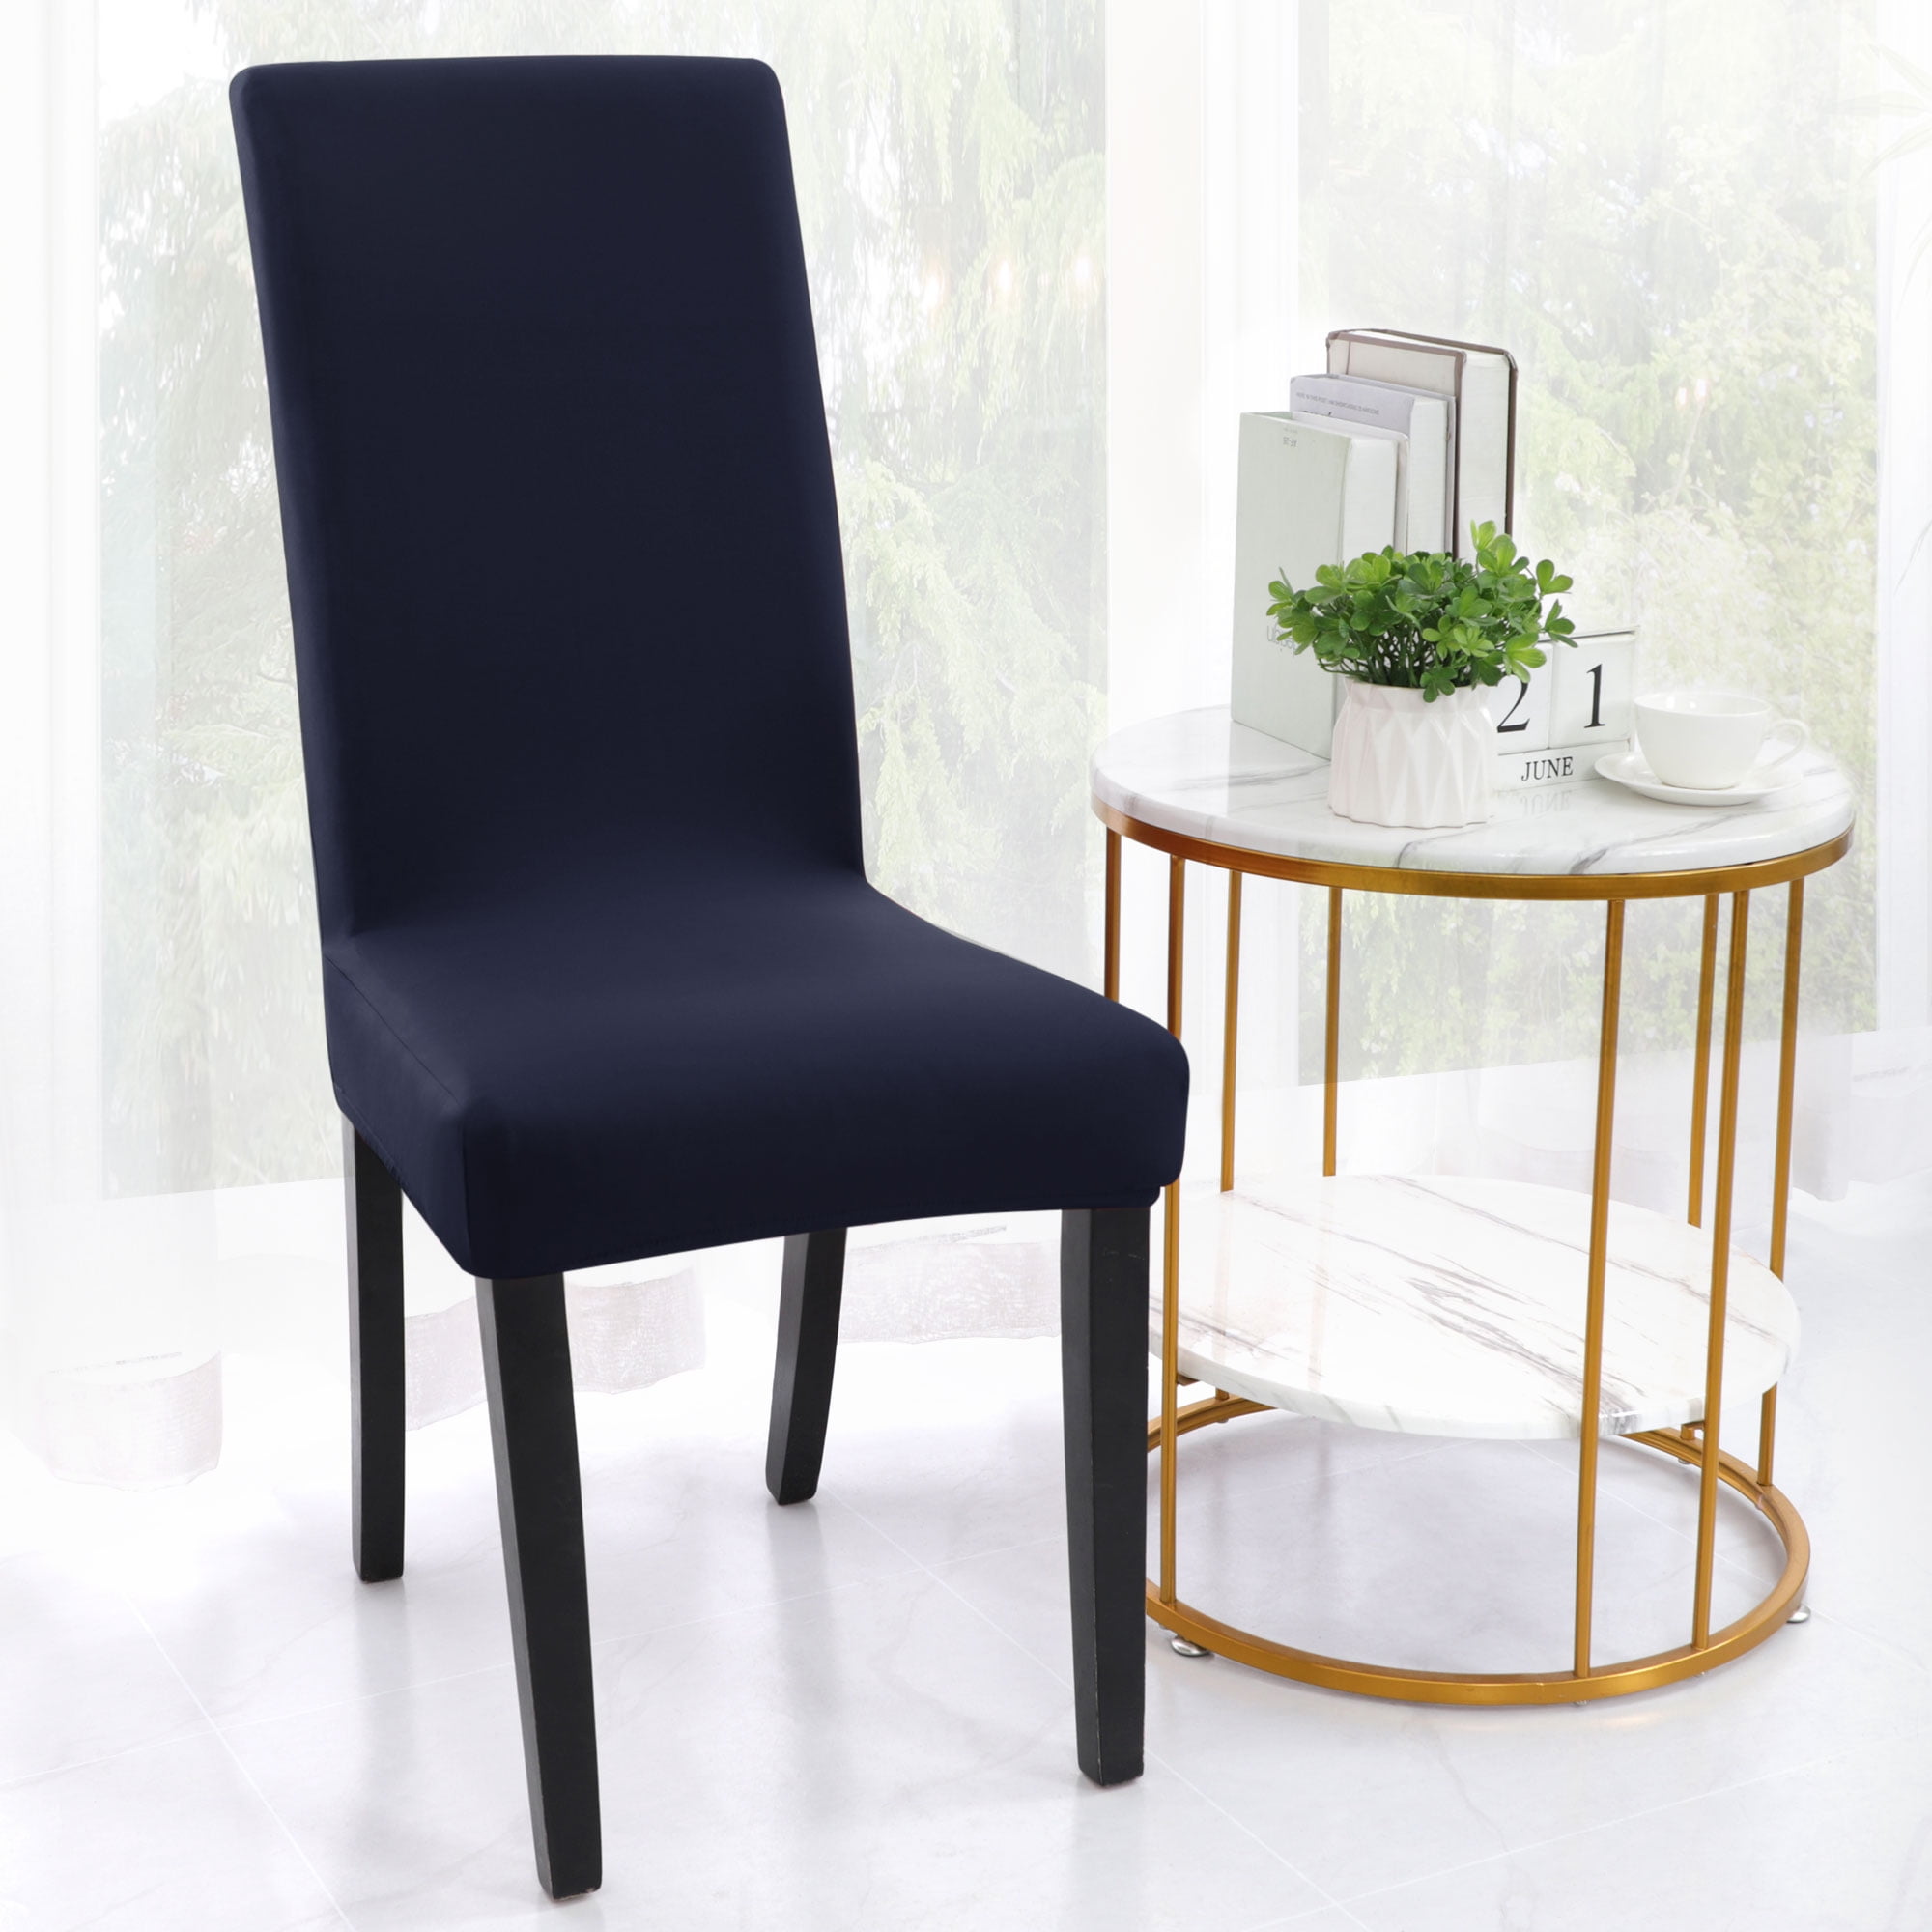 Details about   Elastic Dining Chair Covers Seat Protective Covers 1/2/4pcs Wedding Party  L 